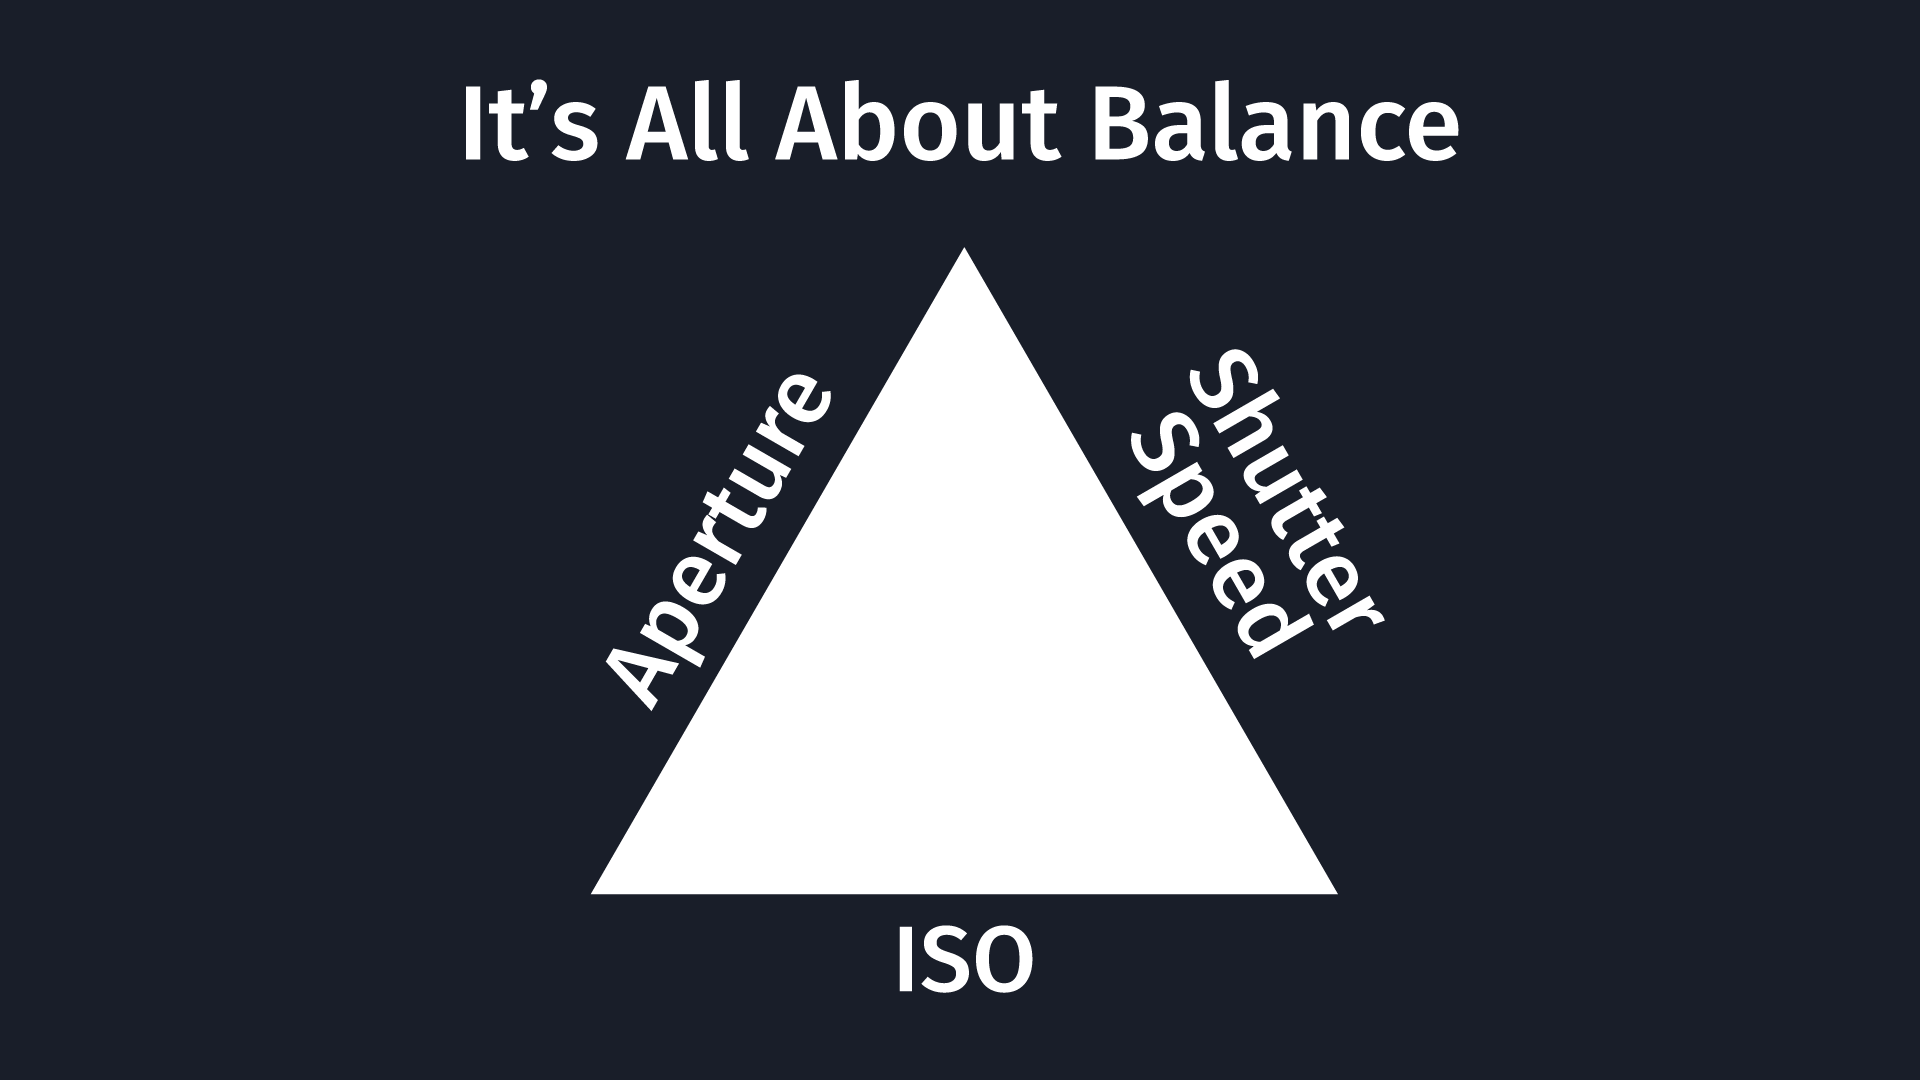 It's All About Balance